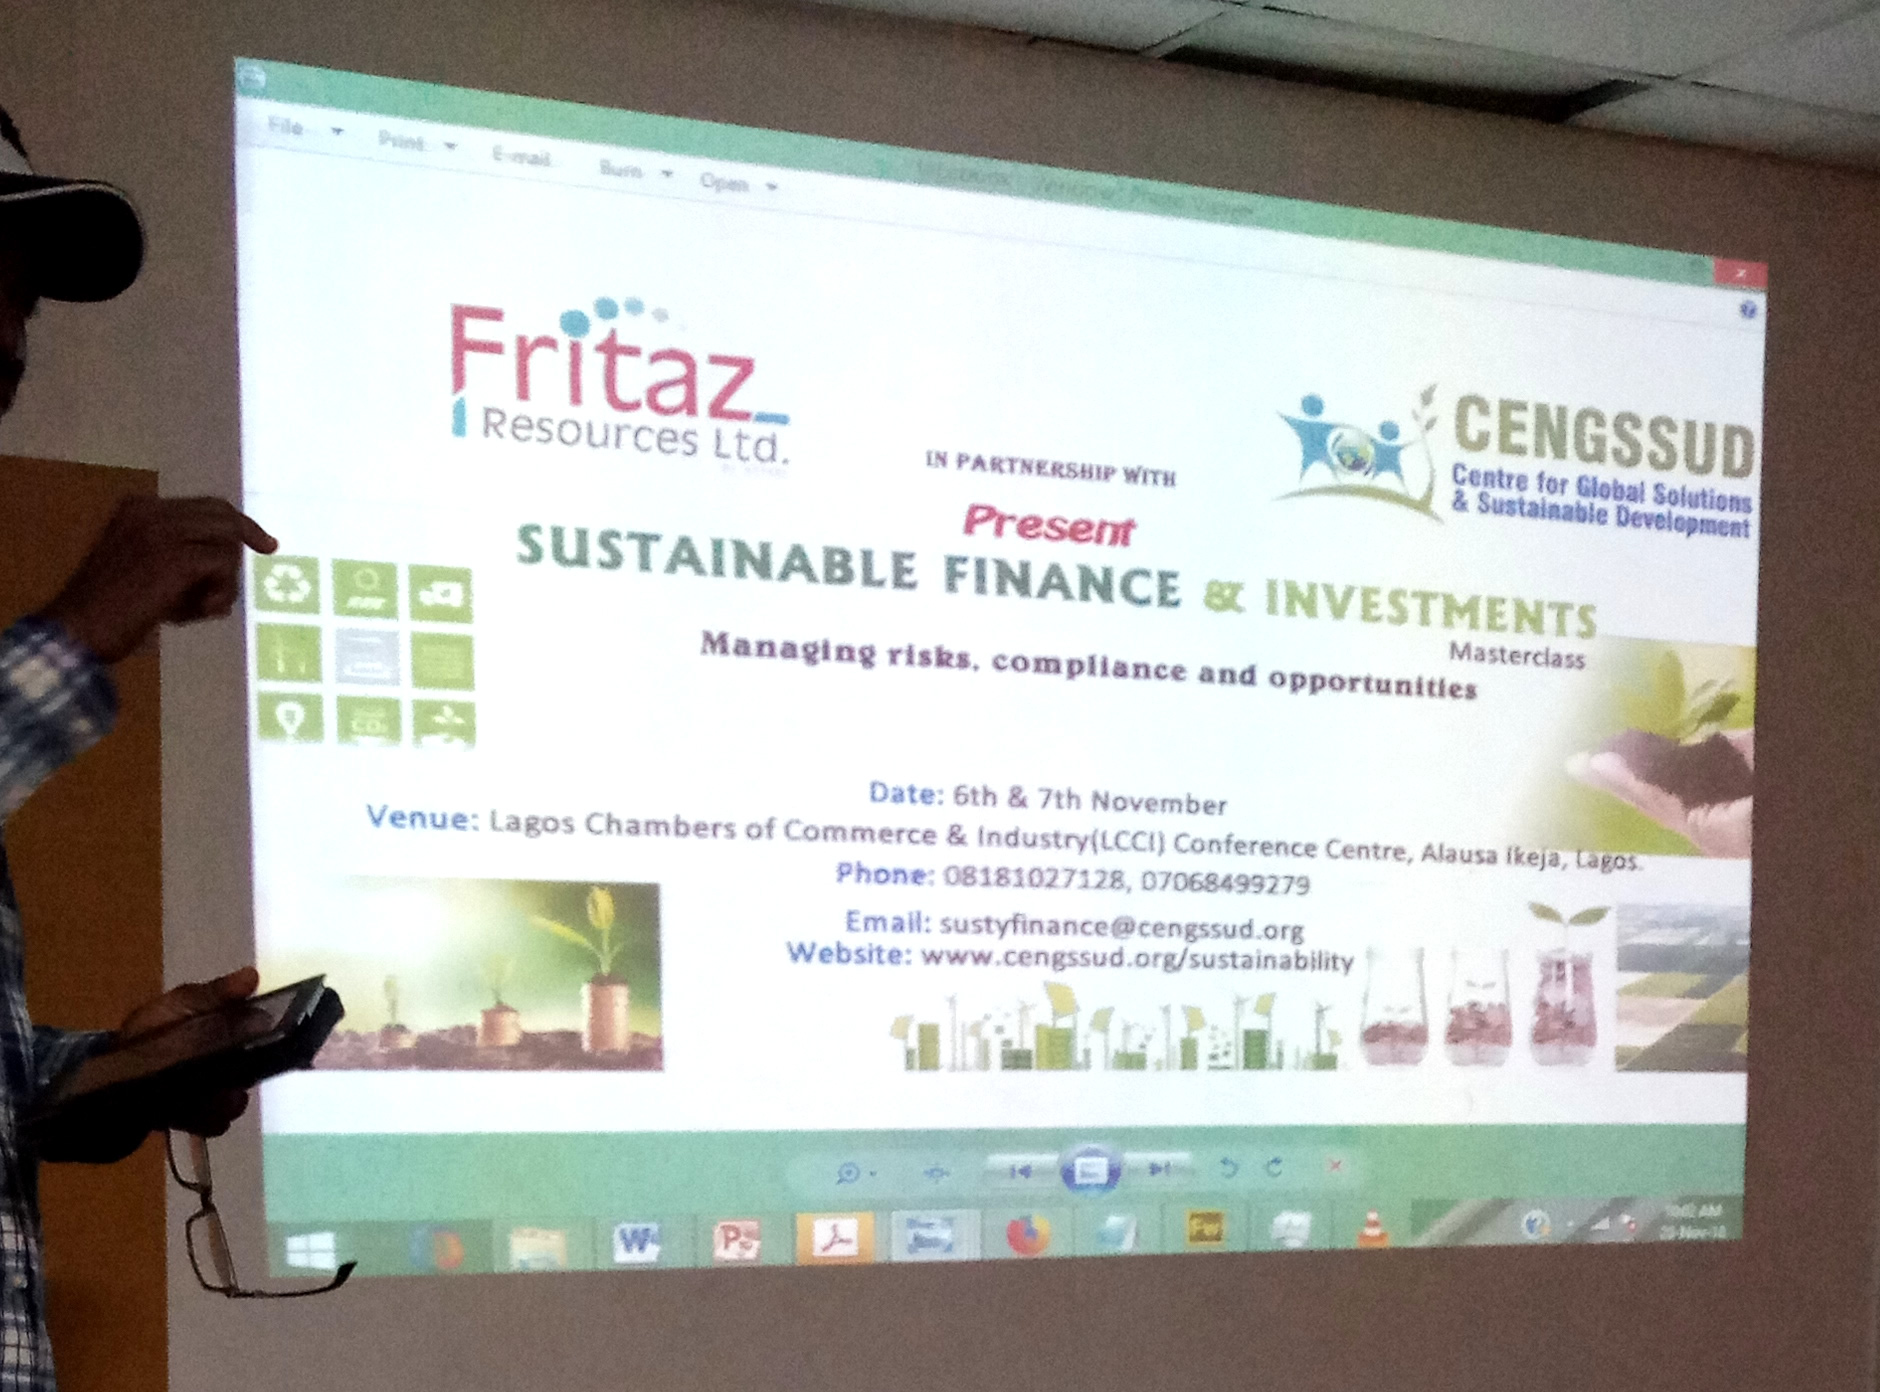 Sustainable Finance and Investments Masterclass